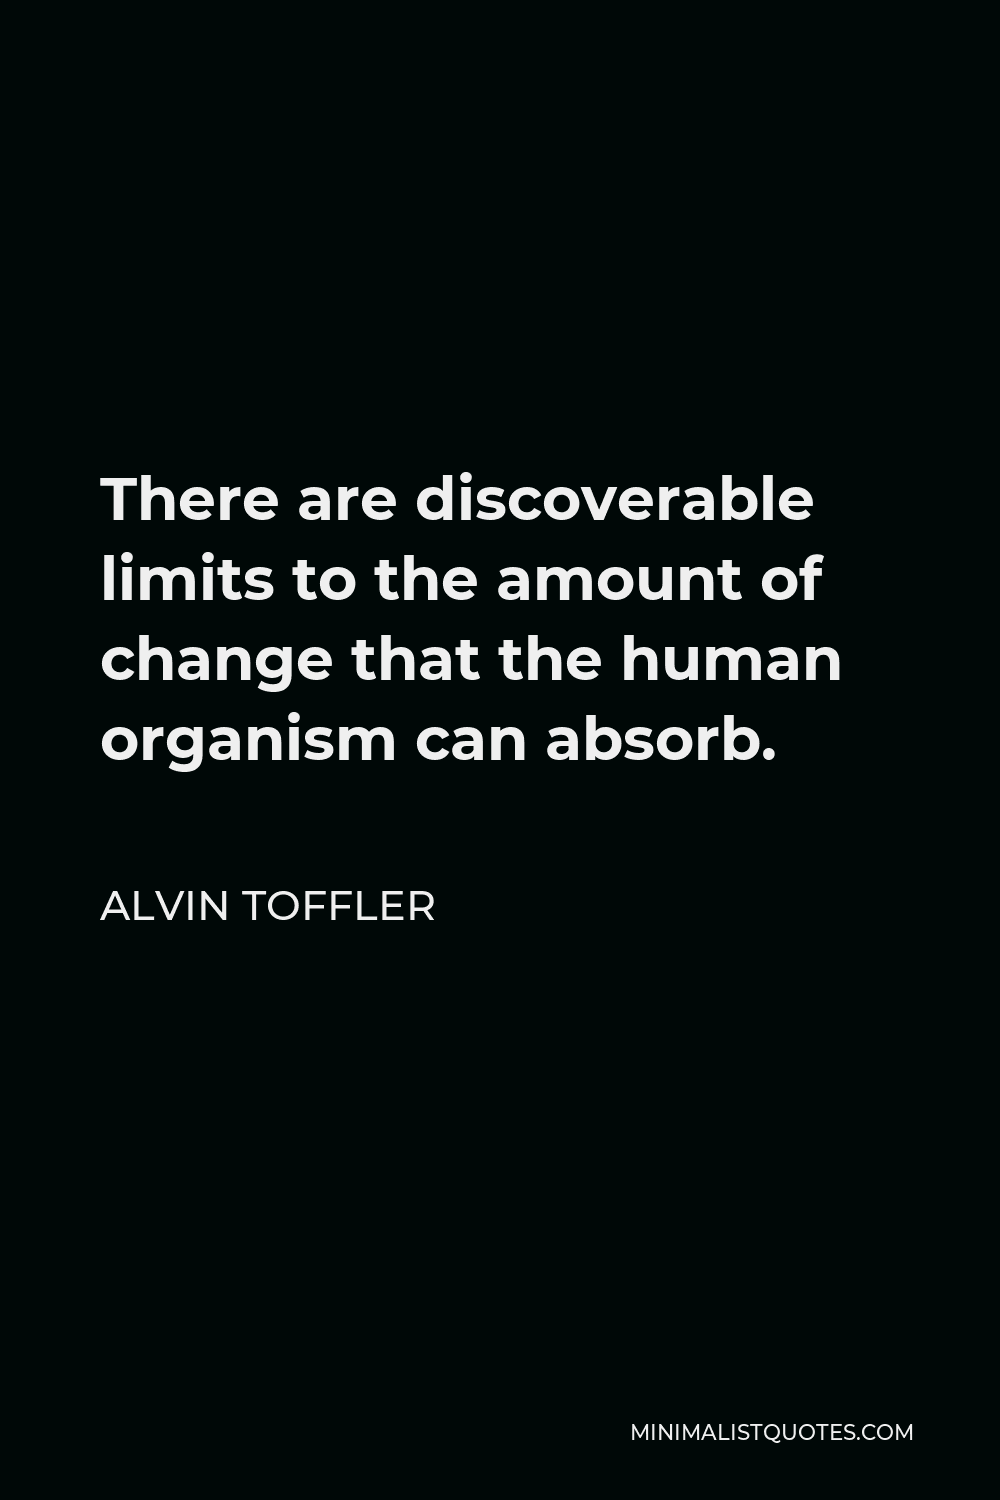 Alvin Toffler Quote - There are discoverable limits to the amount of change that the human organism can absorb.